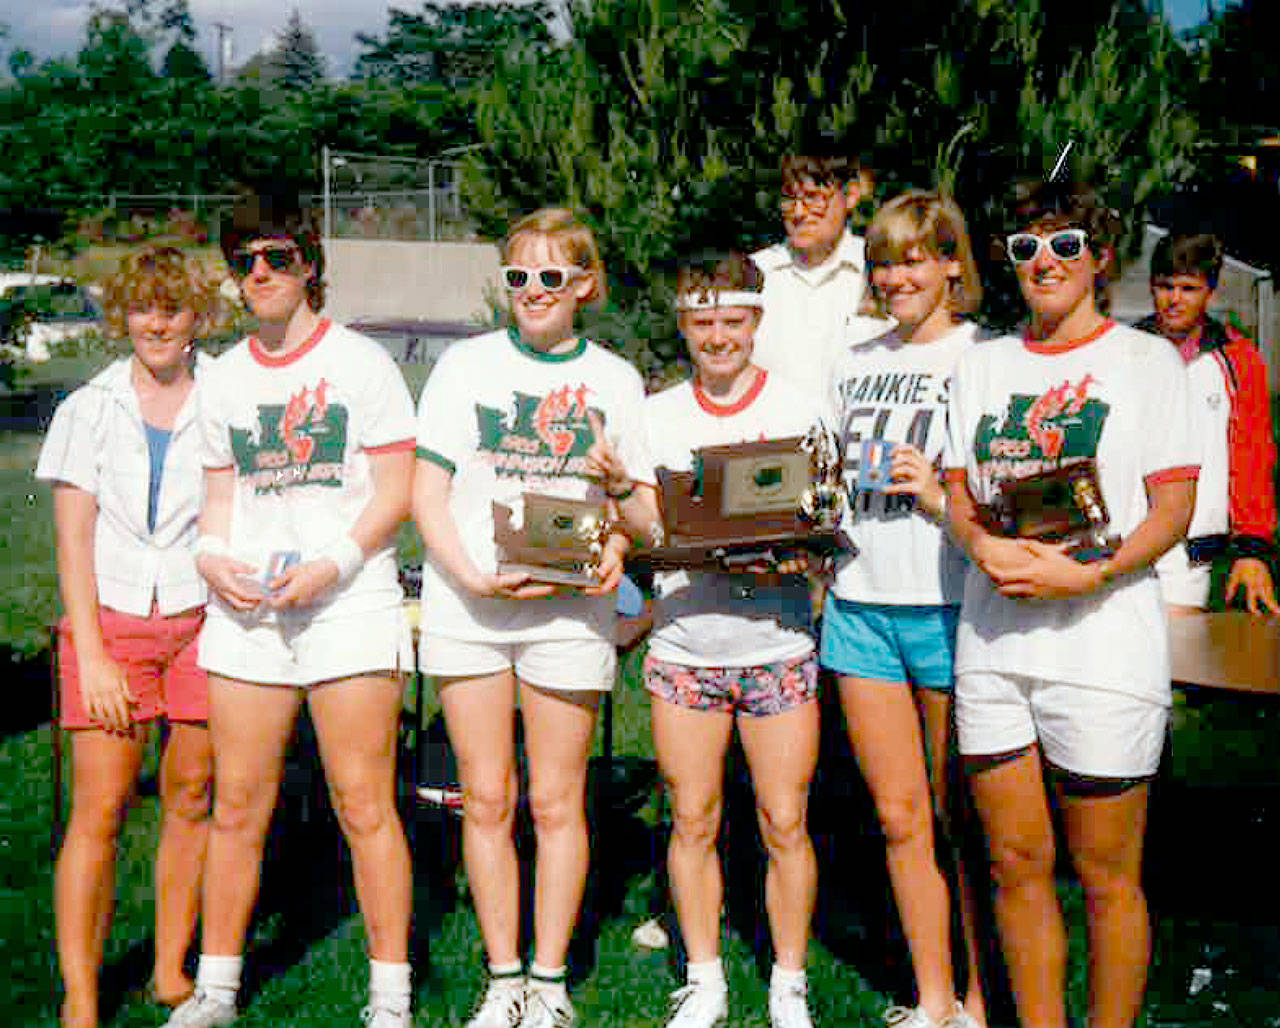 The 1985 Port Angeles girls tennis state championship team, the only team state champions in school history, will be inducted into the Port Angeles High School Hall of Fame on April 20. Team members are, from left, Suzie Hill (alternate), Nicole Ostrowski, Mary Dill, Leigh Morgan, Penni Dill and Carolyn Crist.